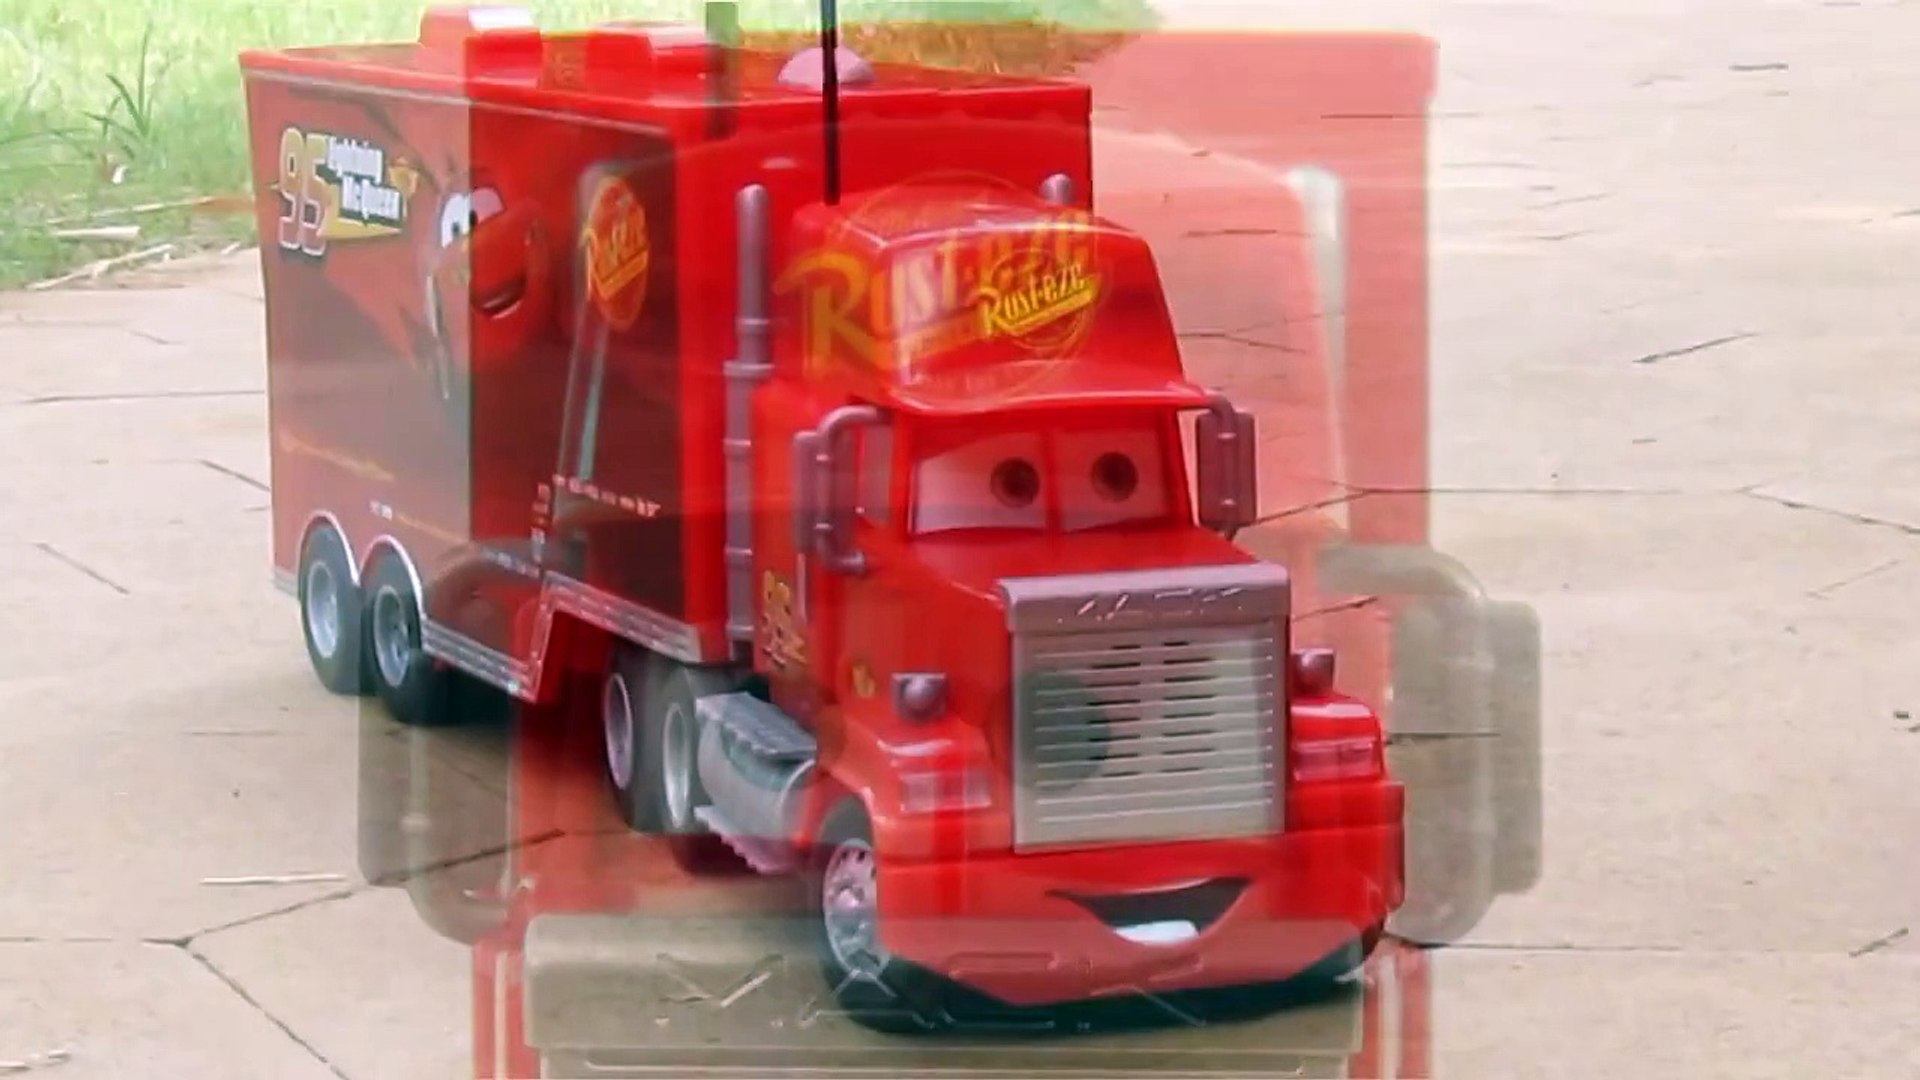 Remote Disney Pixar Cars2 Toys | RC Turbo Mack Truck Toy Video Review Truck  - Dailymotion Video